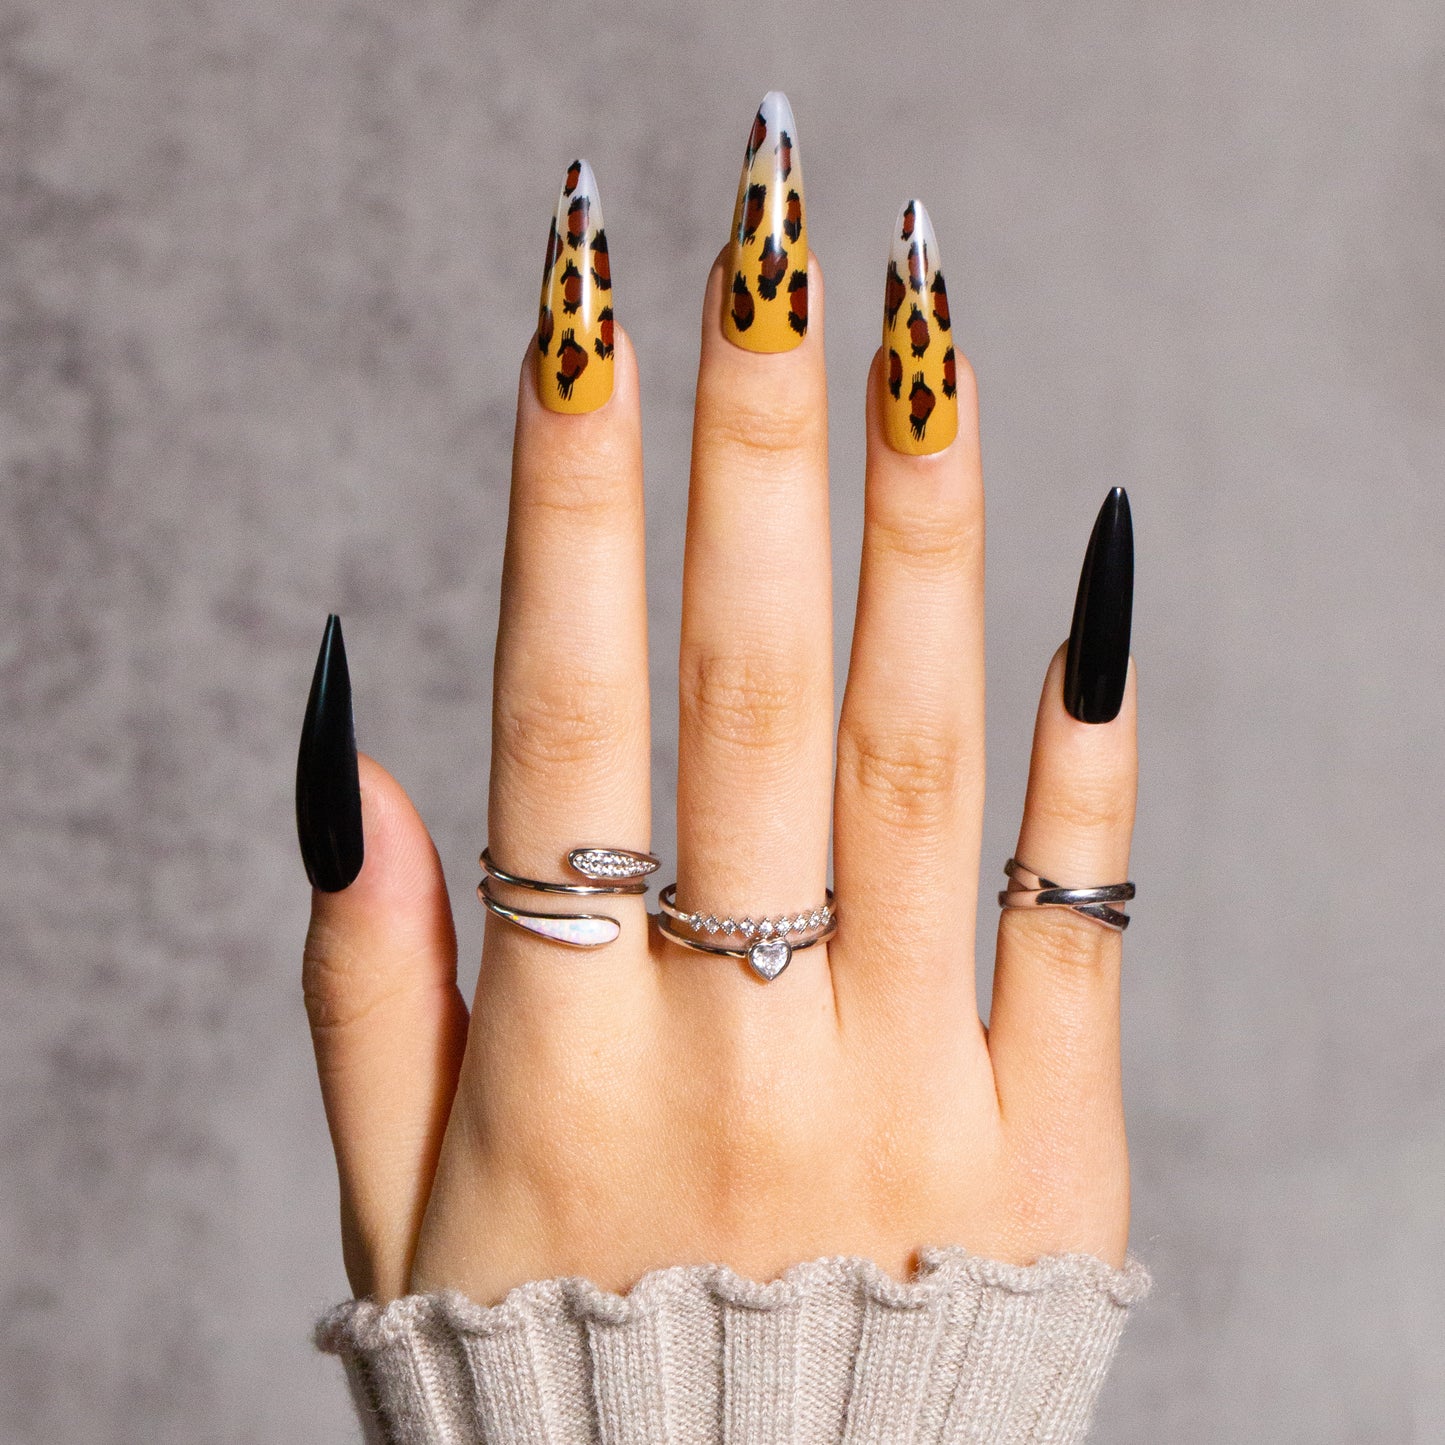 Long Stiletto Press on Nails Yellow Black With Pattern